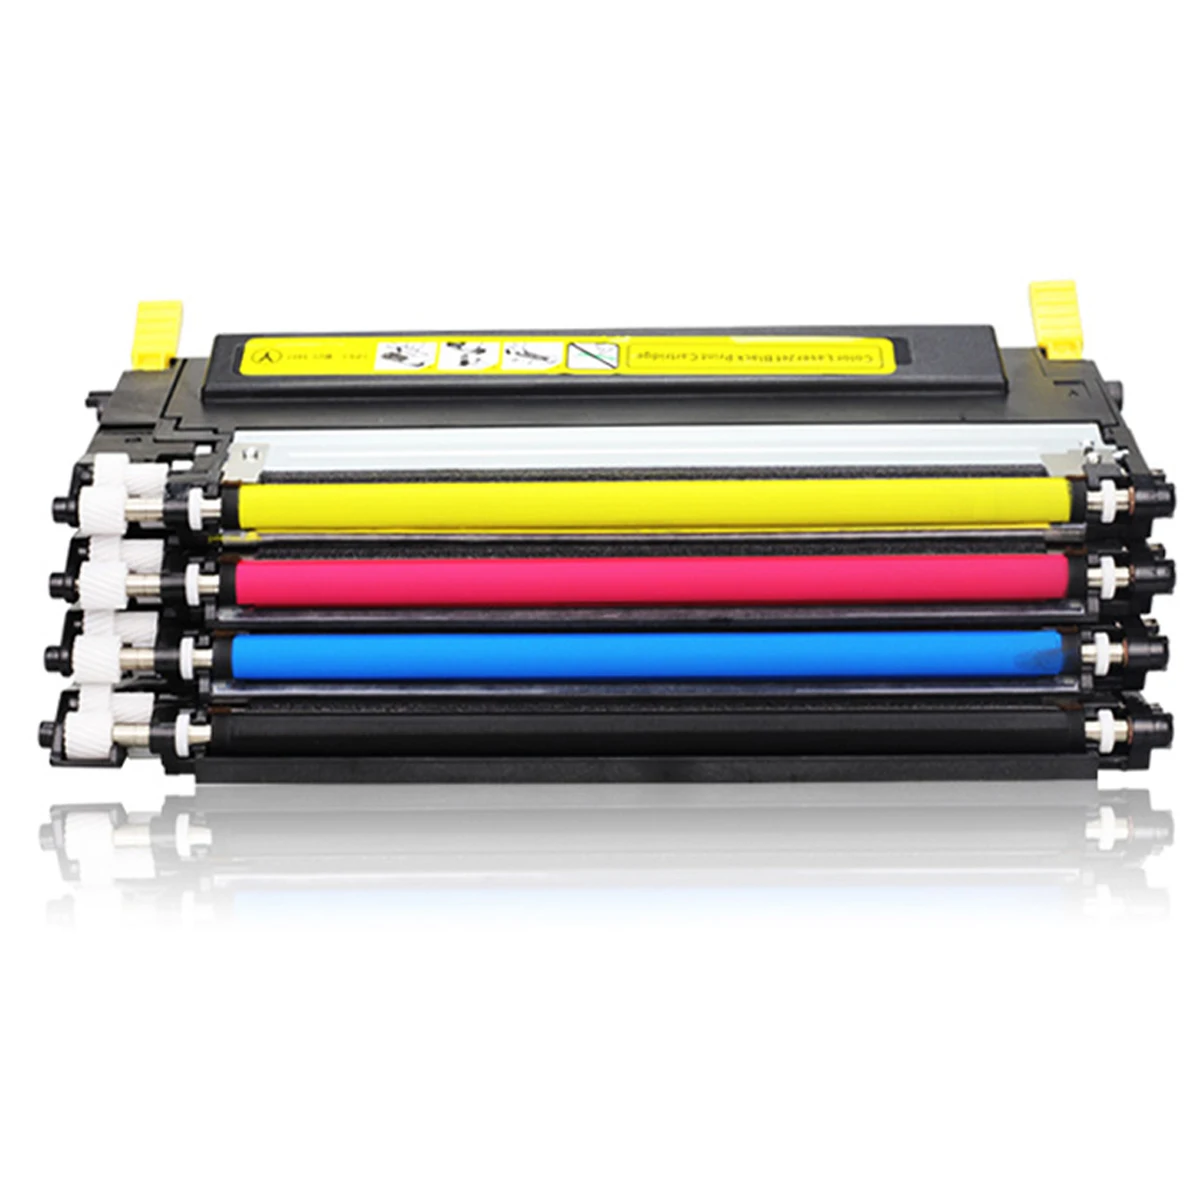 

compatible Toner Cartridge for 117a 117 w2070a For HP MFP179fnw 178nw MFP178nw 150a 150nw color Laser printer new with chip